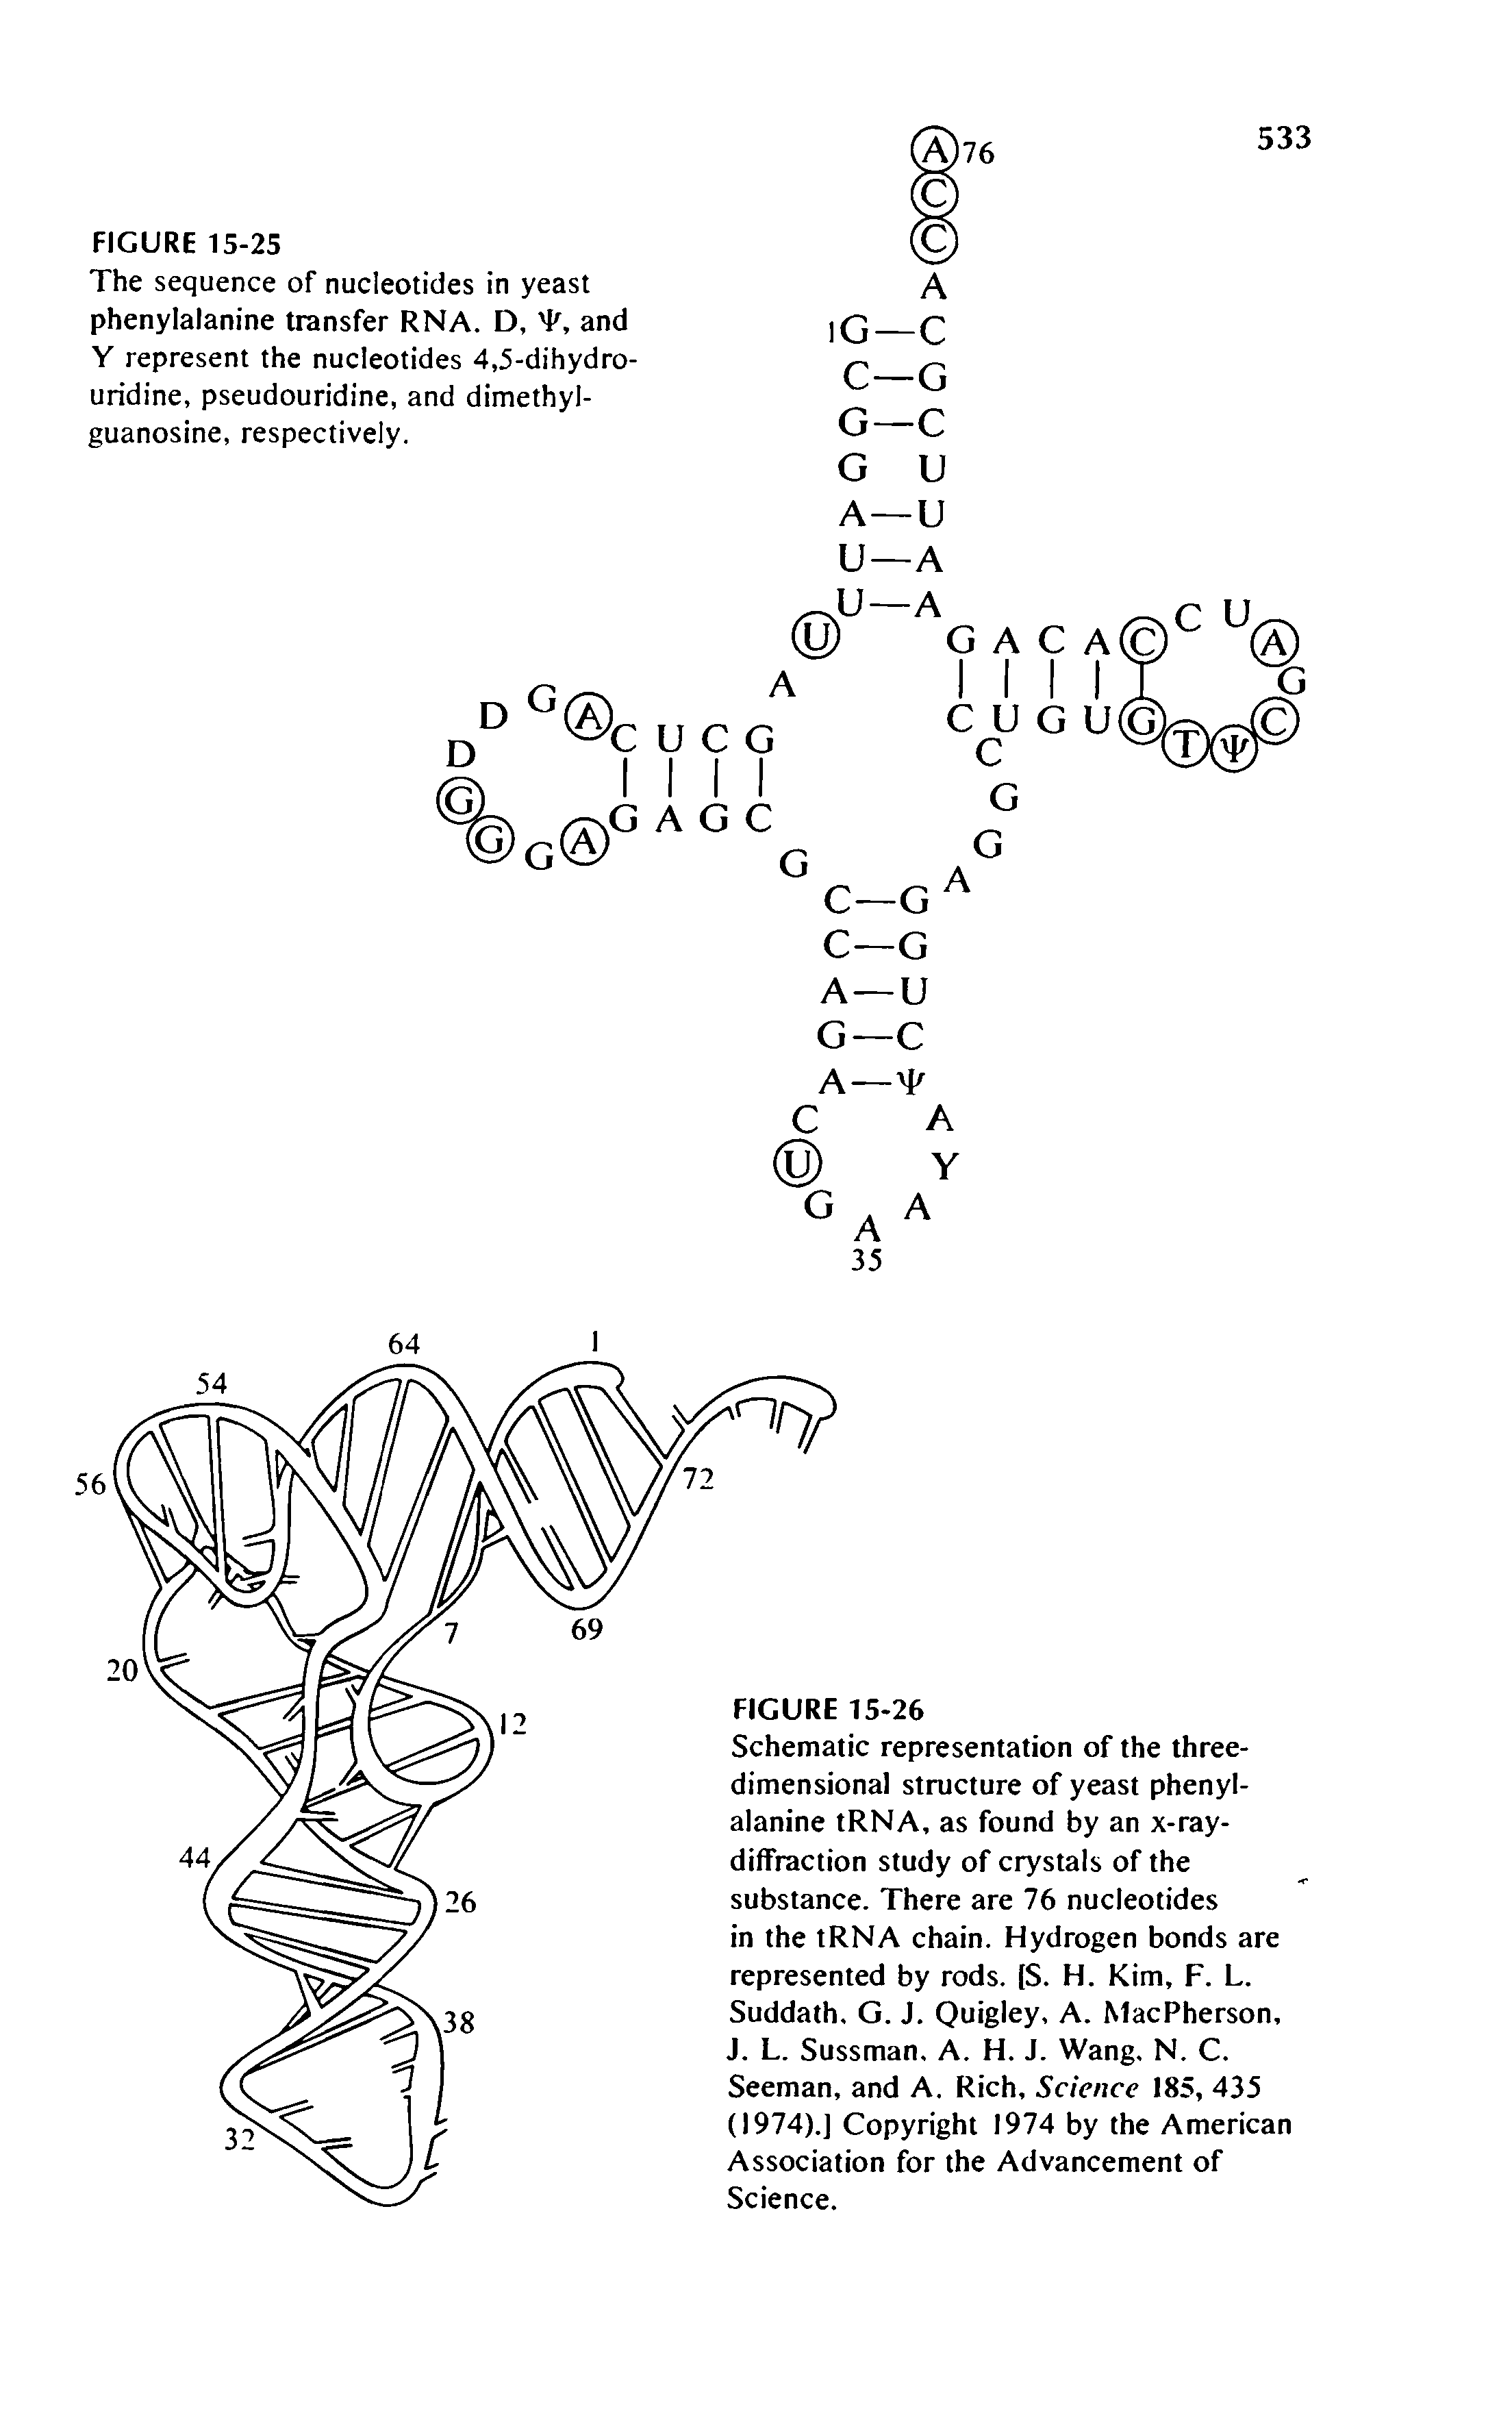 Schematic representation of the three-dimensional structure of yeast phenylalanine tRNA, as found by an x-ray-diifraction study of crystals of the substance. There are 76 nucleotides in the tRNA chain. Hydrogen bonds are represented by rods. (S. H. Kim, F. L. Suddath. G. J. Quigley, A. MacPherson, J. L. Sussman. A. H. J. Wang. N. C. Seeman, and A. Rich, Science 185, 435 (1974).] Copyright 1974 by the American Association for the Advancement of Science.